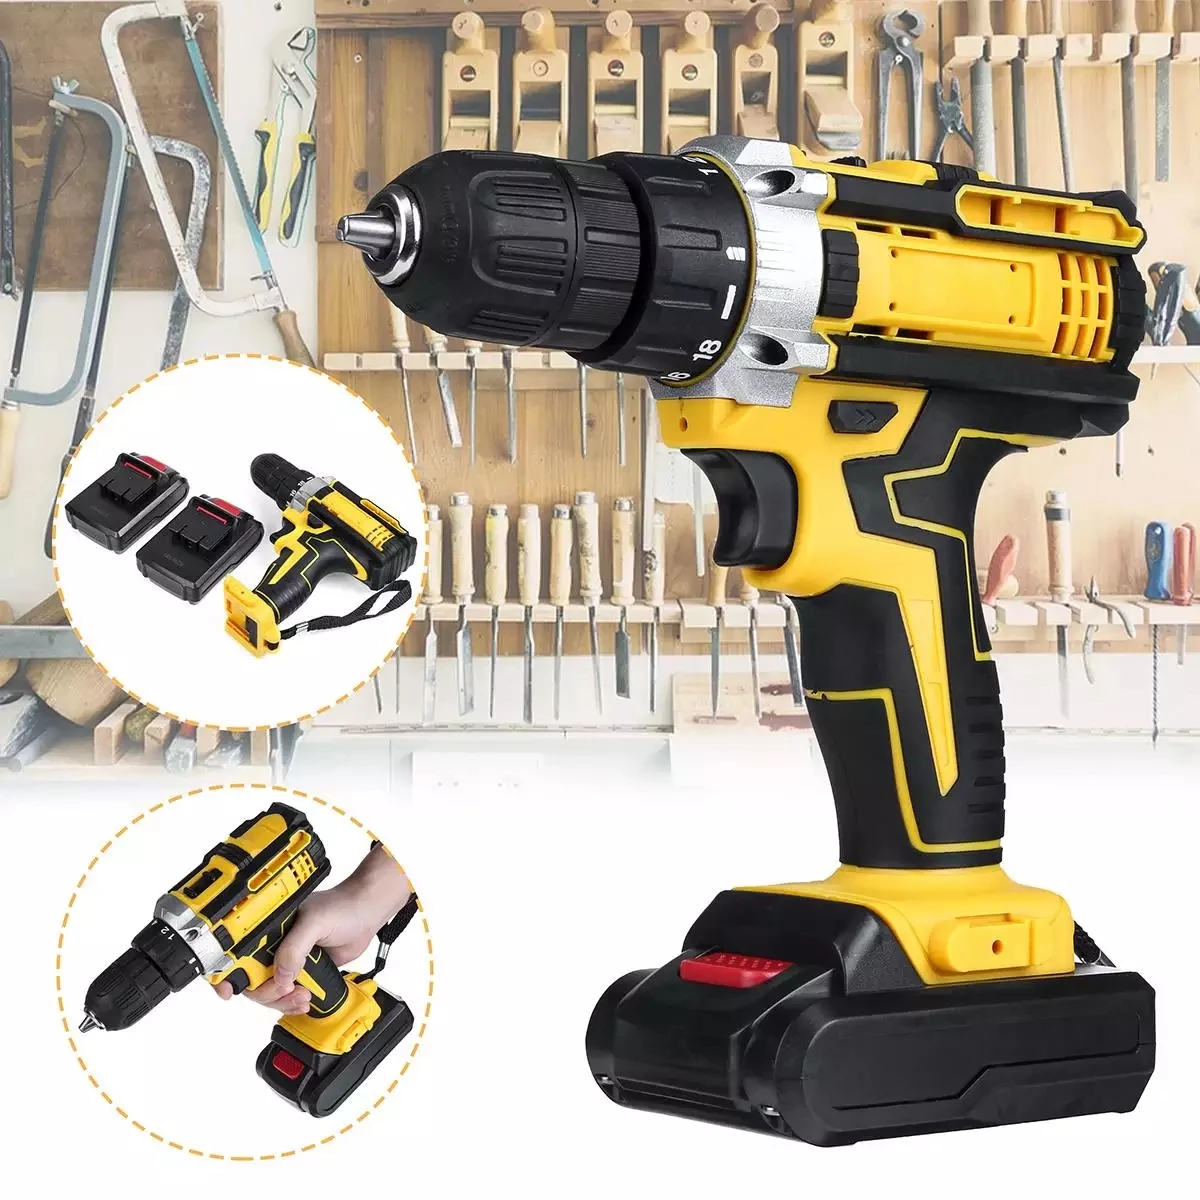 

48VF 3 in 1 Electric Drill Impact Drill Cordless Screwdriver Power Driver Wrench Electric Drill With 2pcs Battery Variable Speed